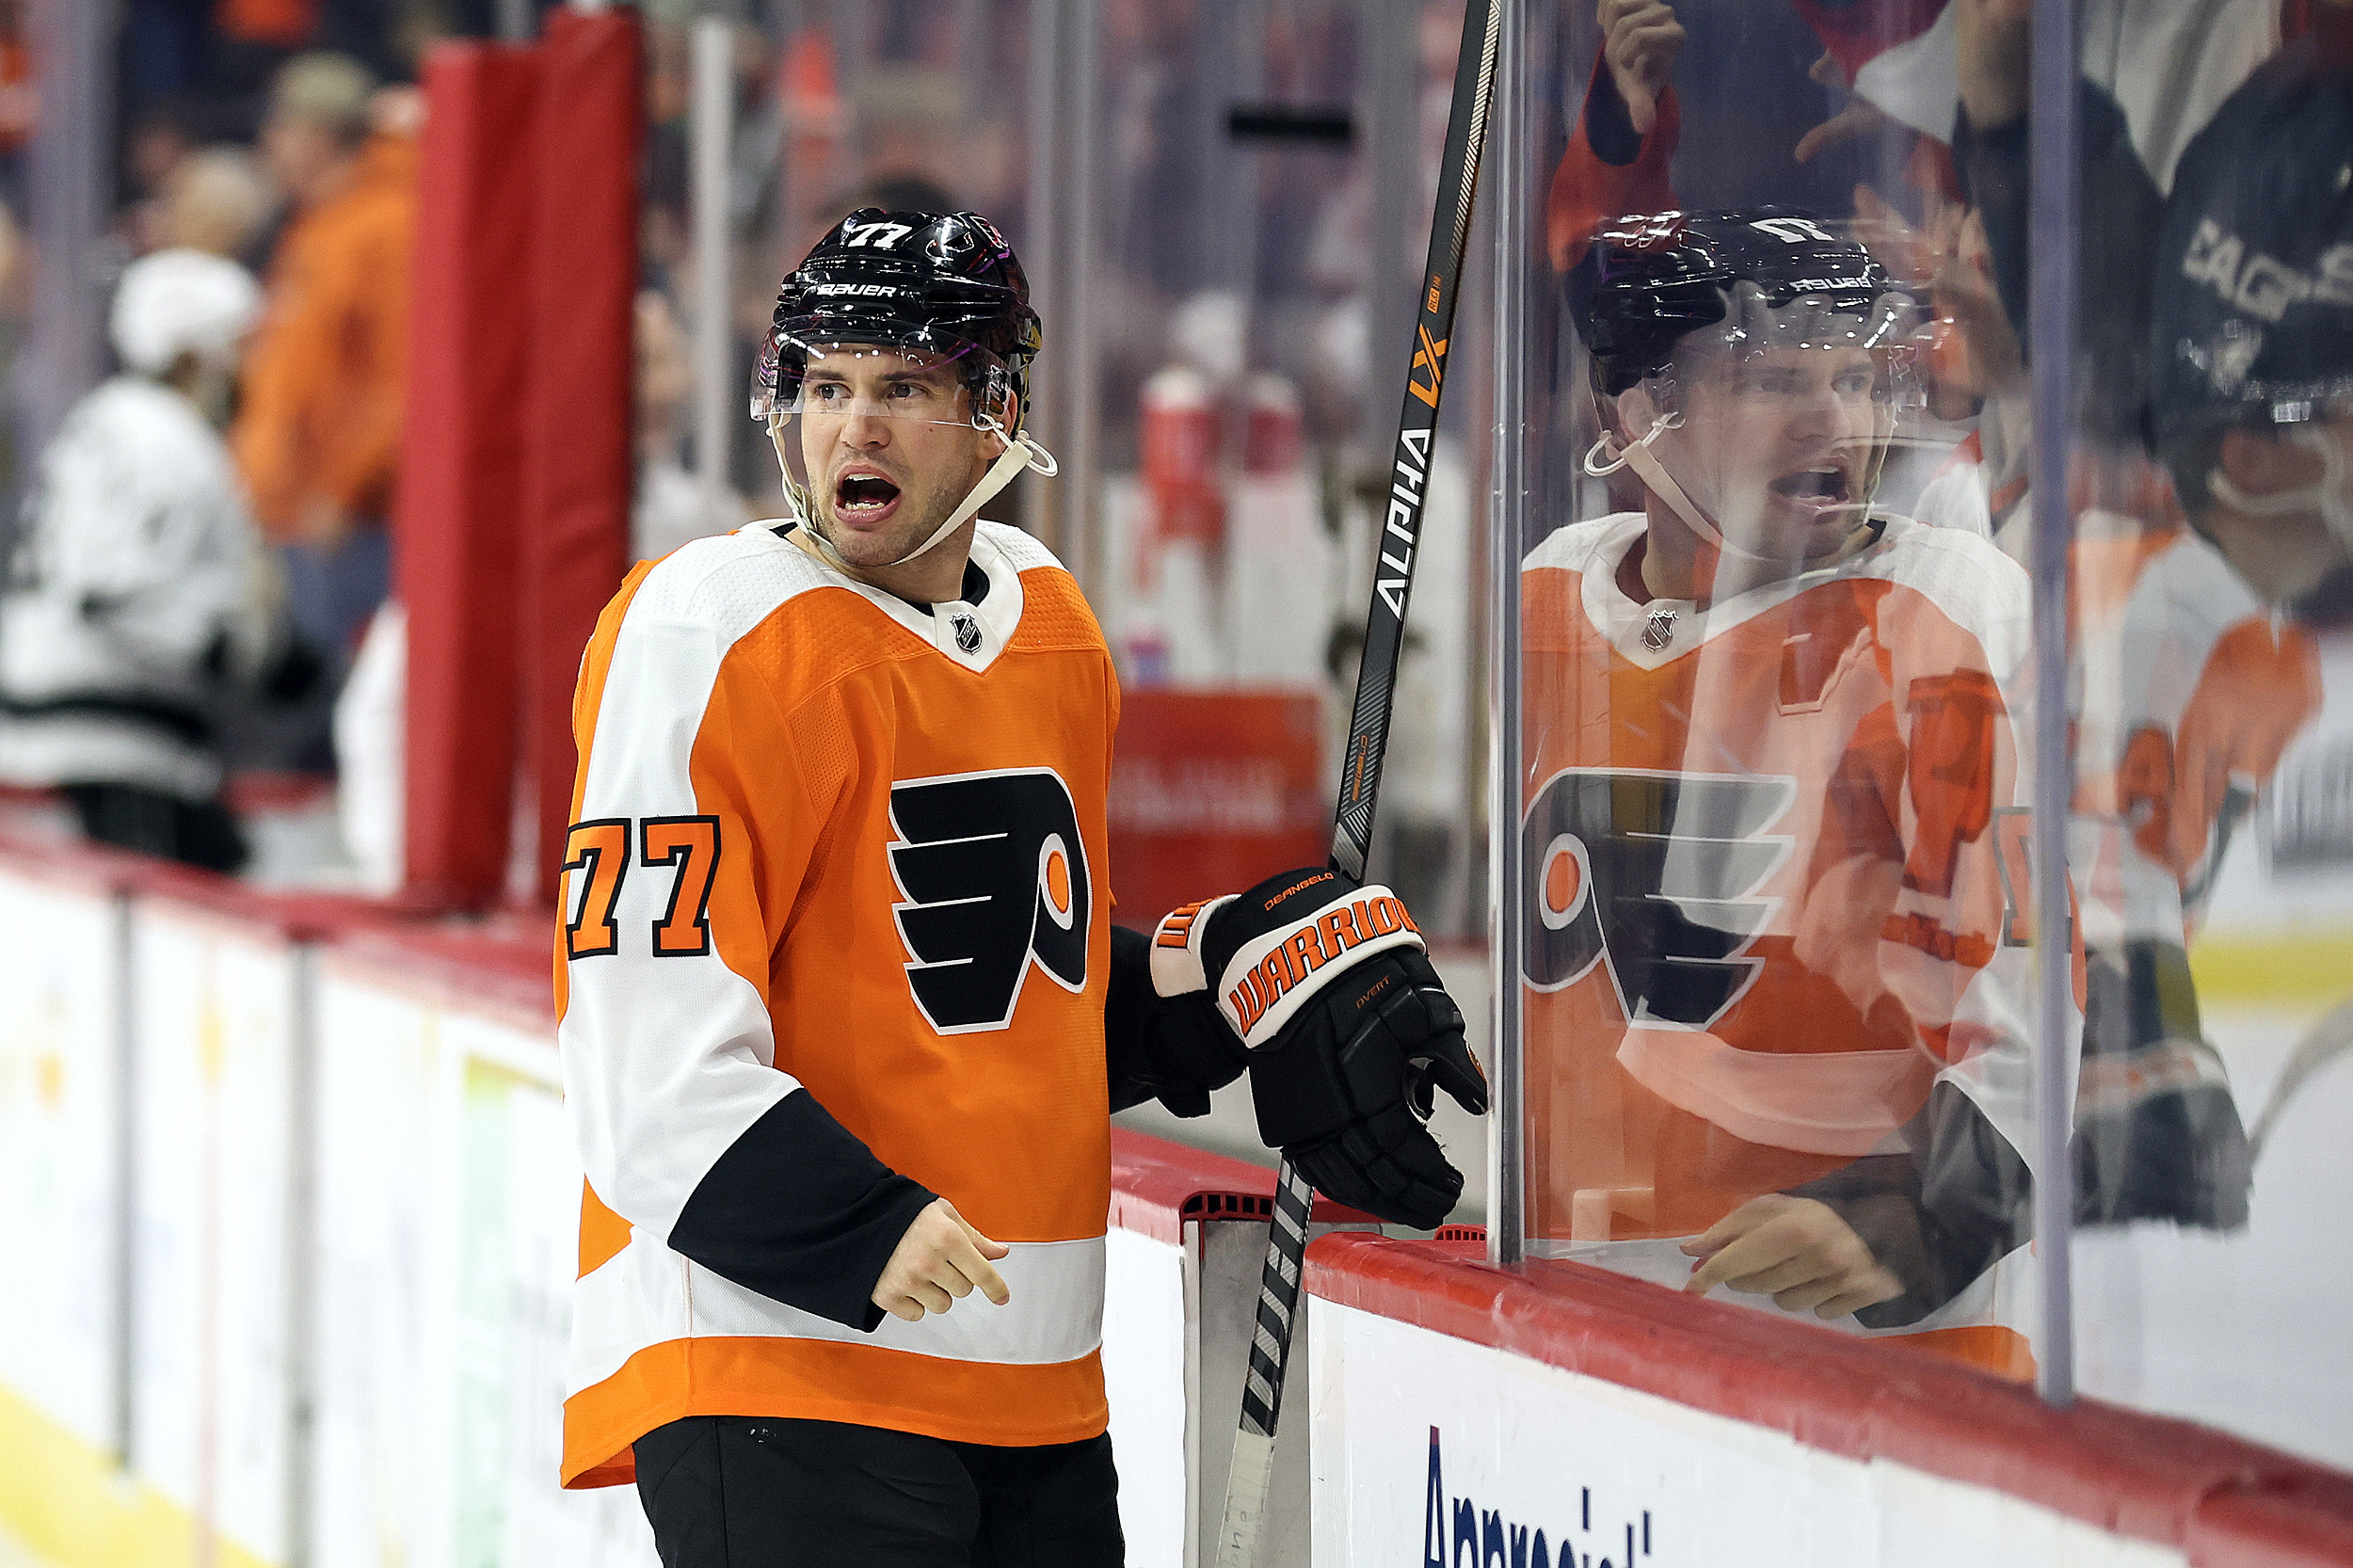 Flyers place defenseman Tony DeAngelo on unconditional waivers